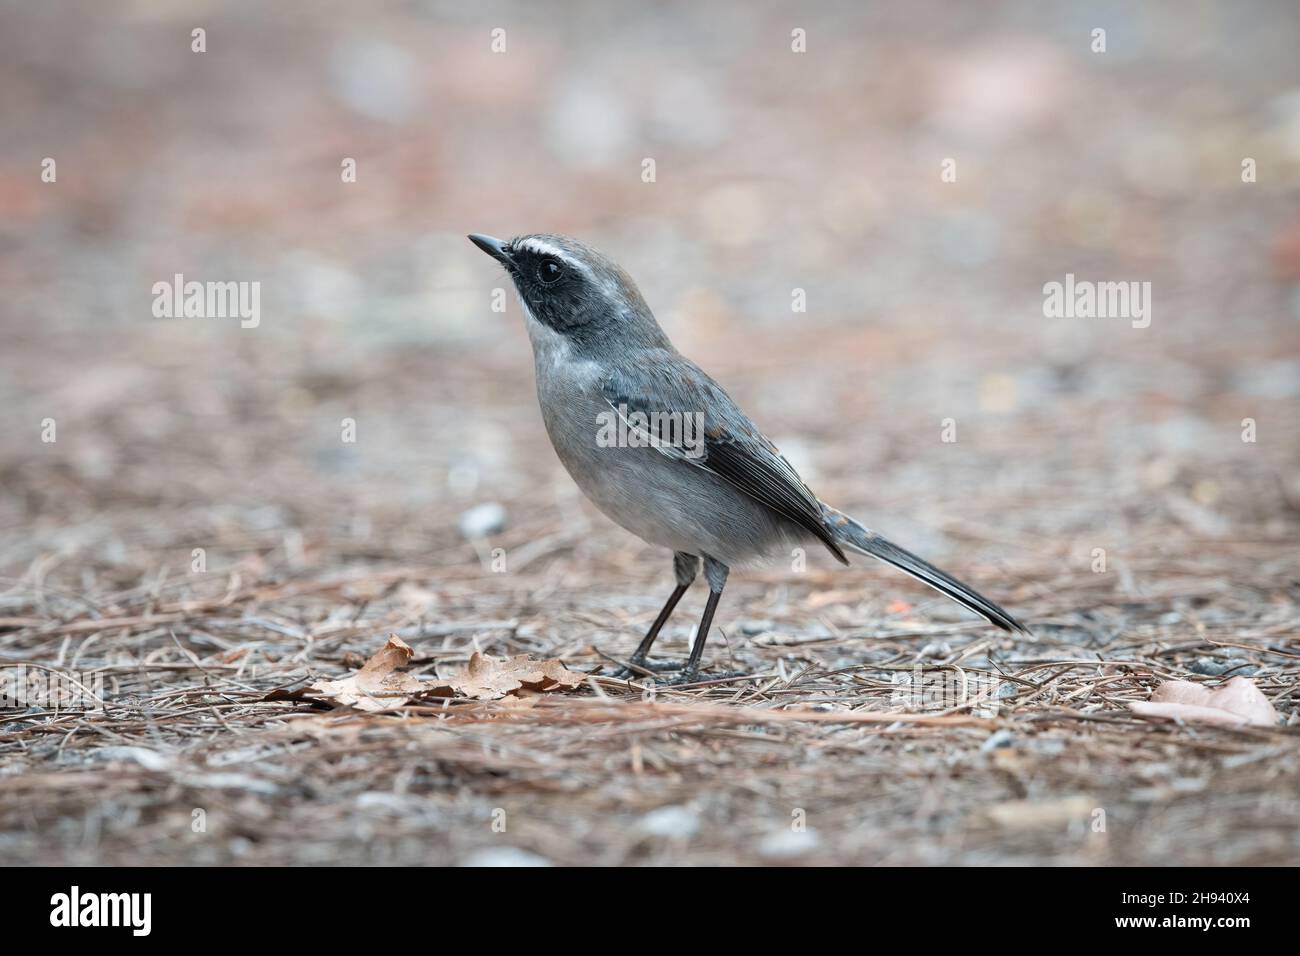 The grey bush chat (Saxicola ferreus) is a species of passerine bird in the family Muscicapidae. It is found in the Himalayas, southern China, Taiwan, Stock Photo